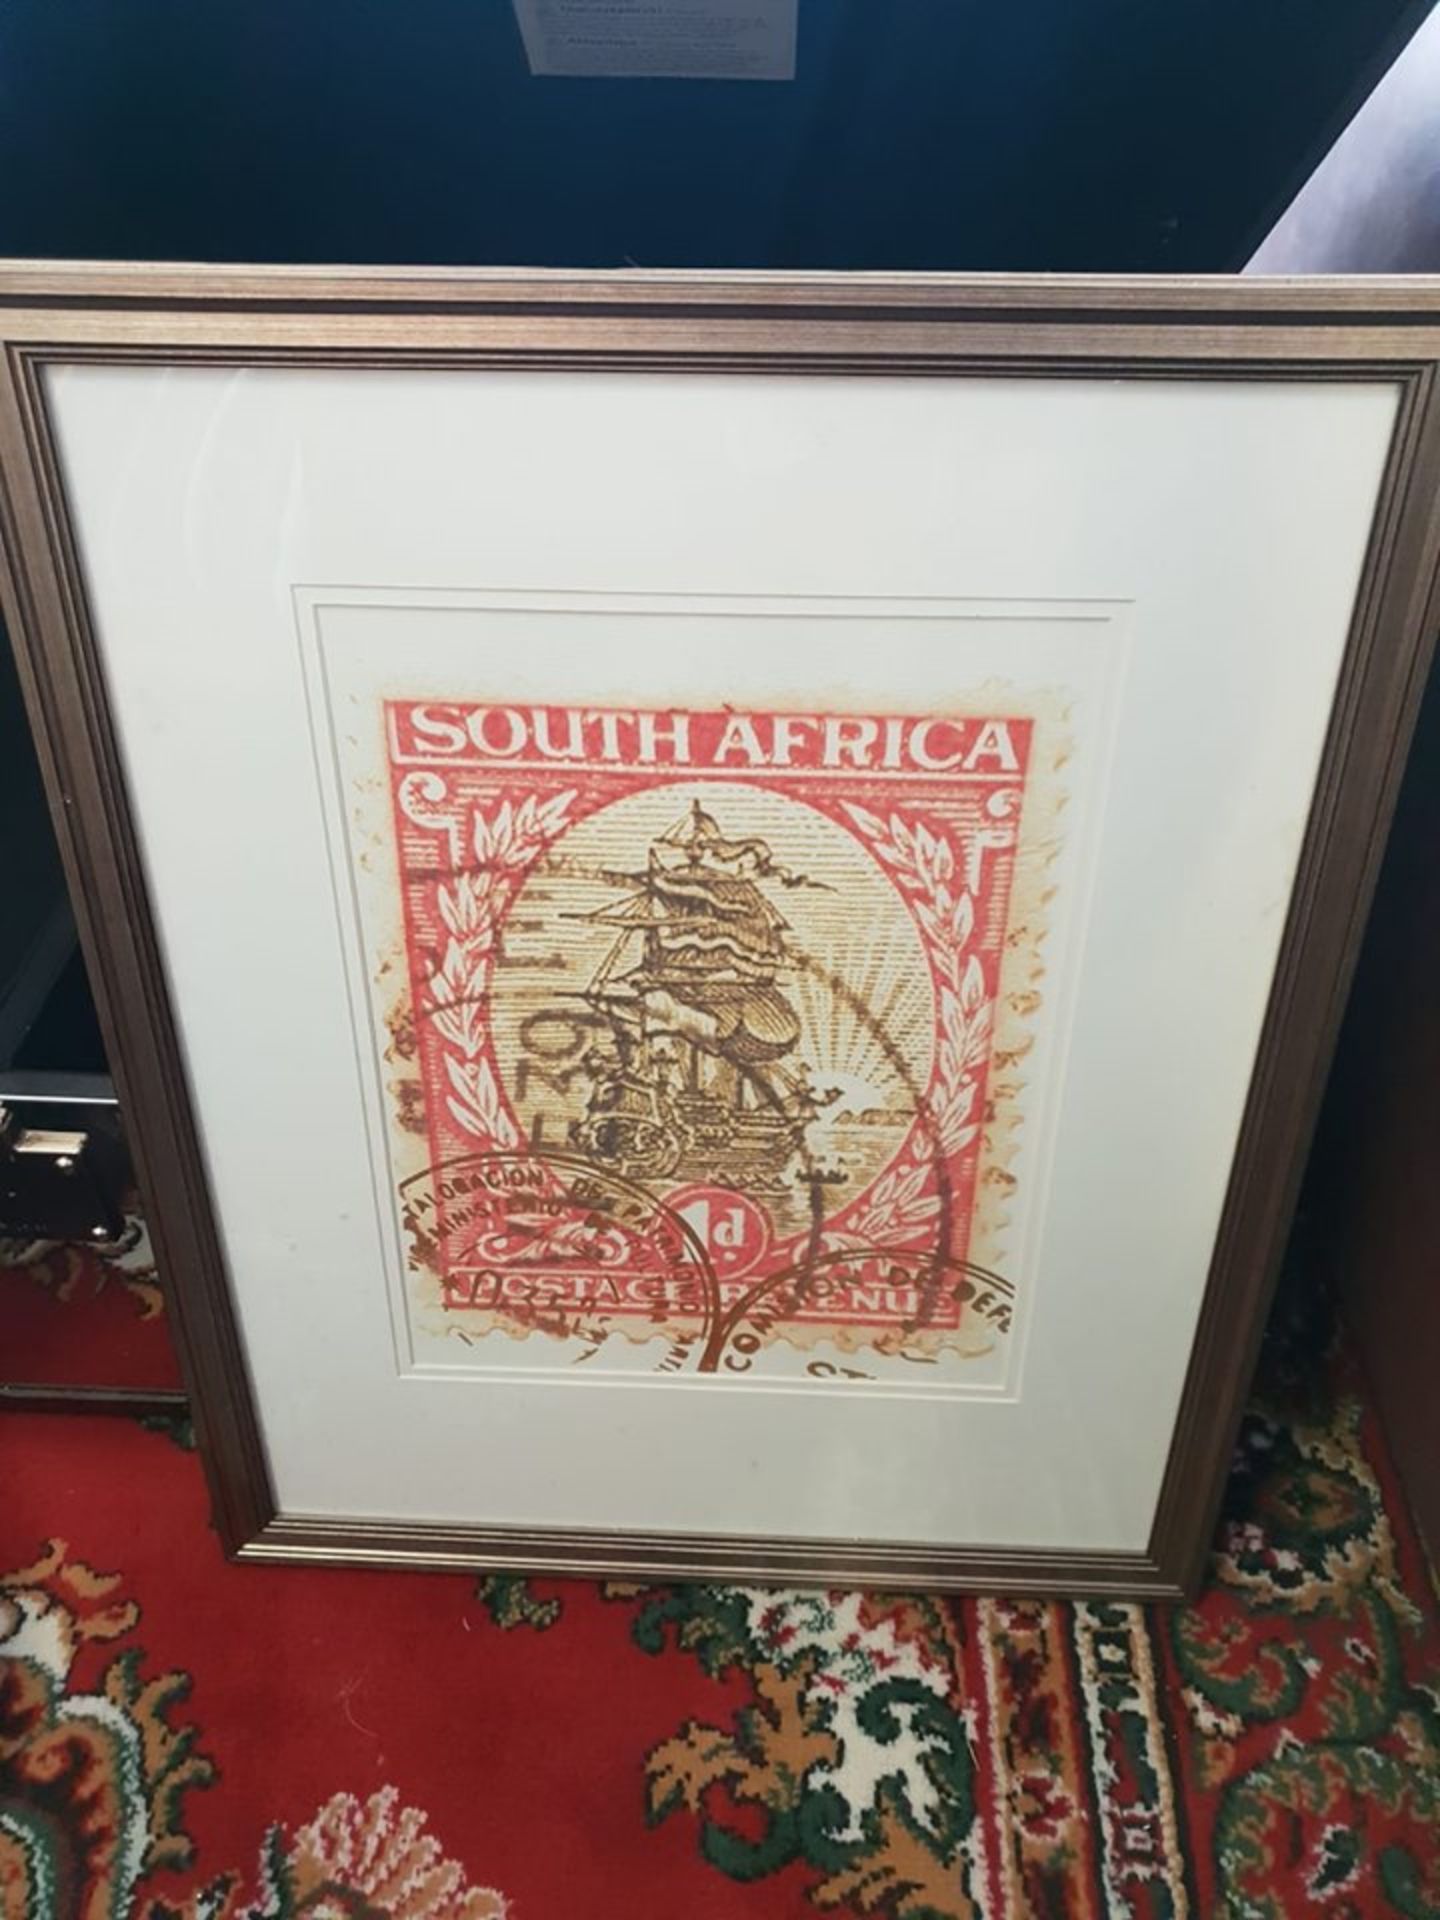 Artwork Framed Graphic Art Print -The Enlarged Print Of An Antique Postage Stamp From South Africa